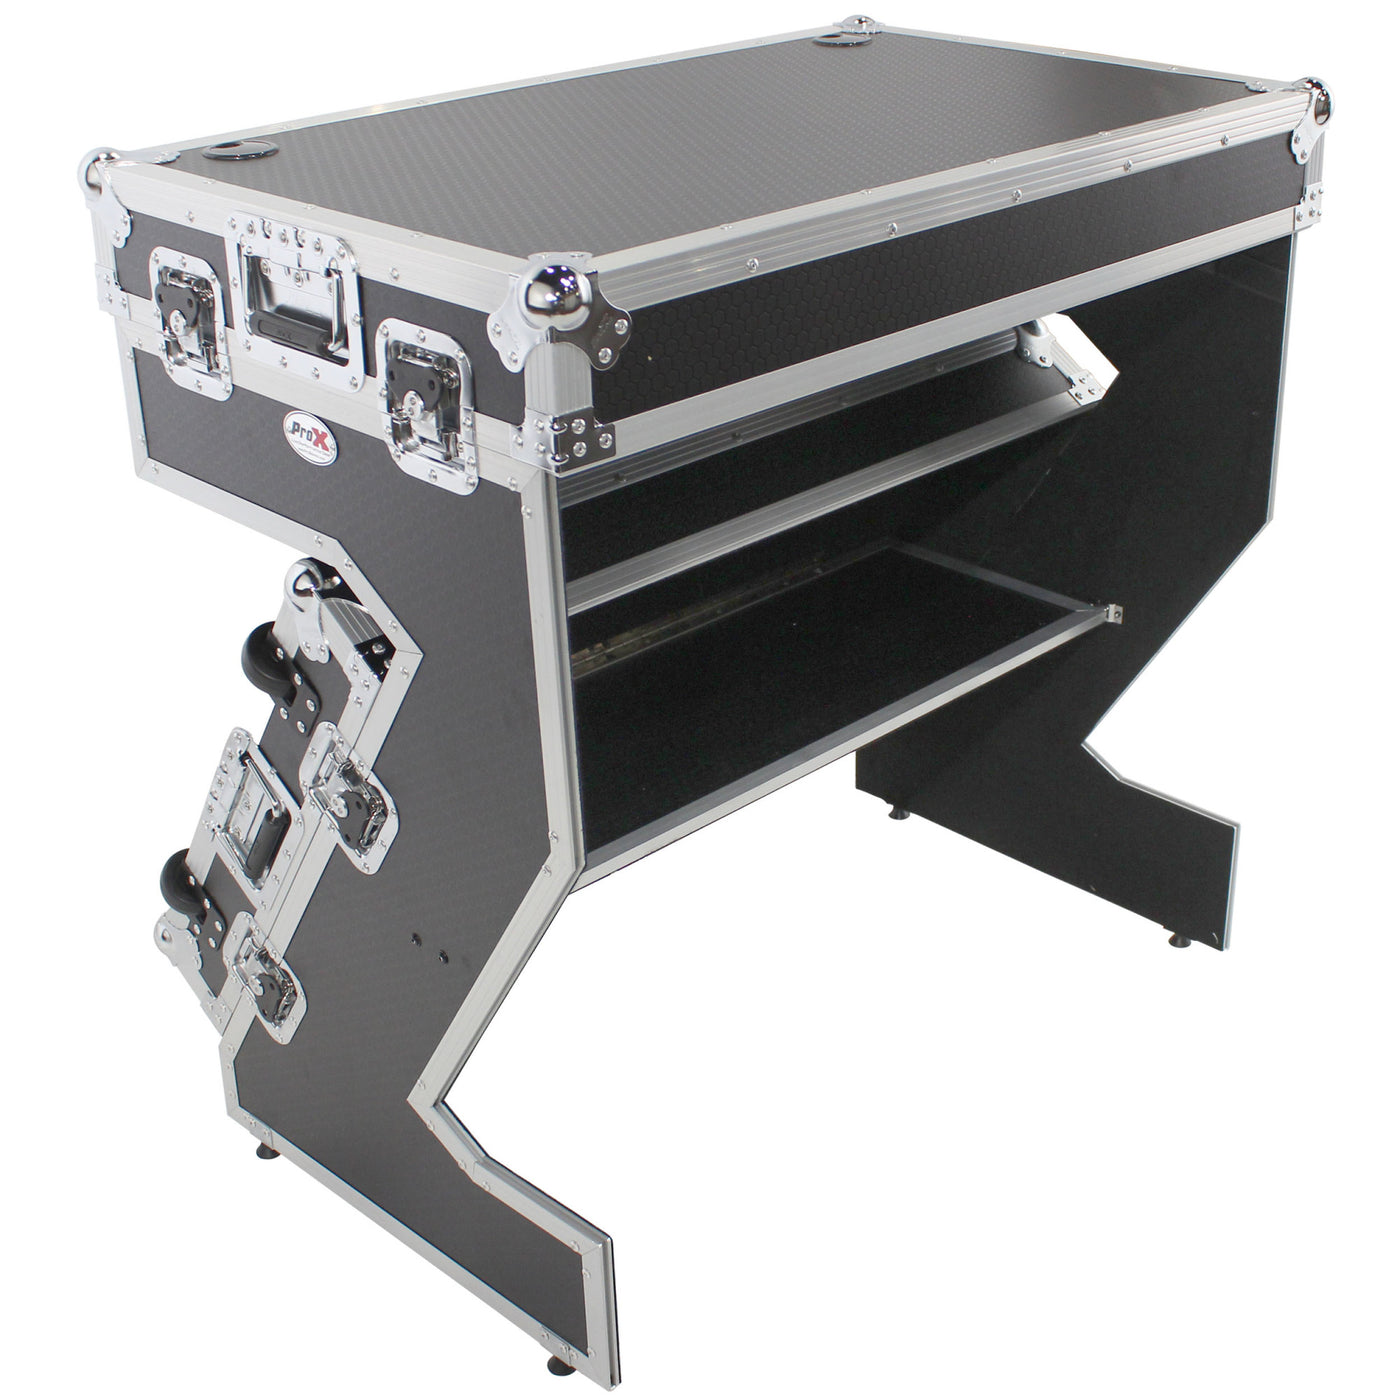 ProX XS-ZTABLEJR DJ Z-Table Junior Workstation, Portable Compact Booth Flight Case Table, With Handles and Wheels, Pro Audio Equipment Storage